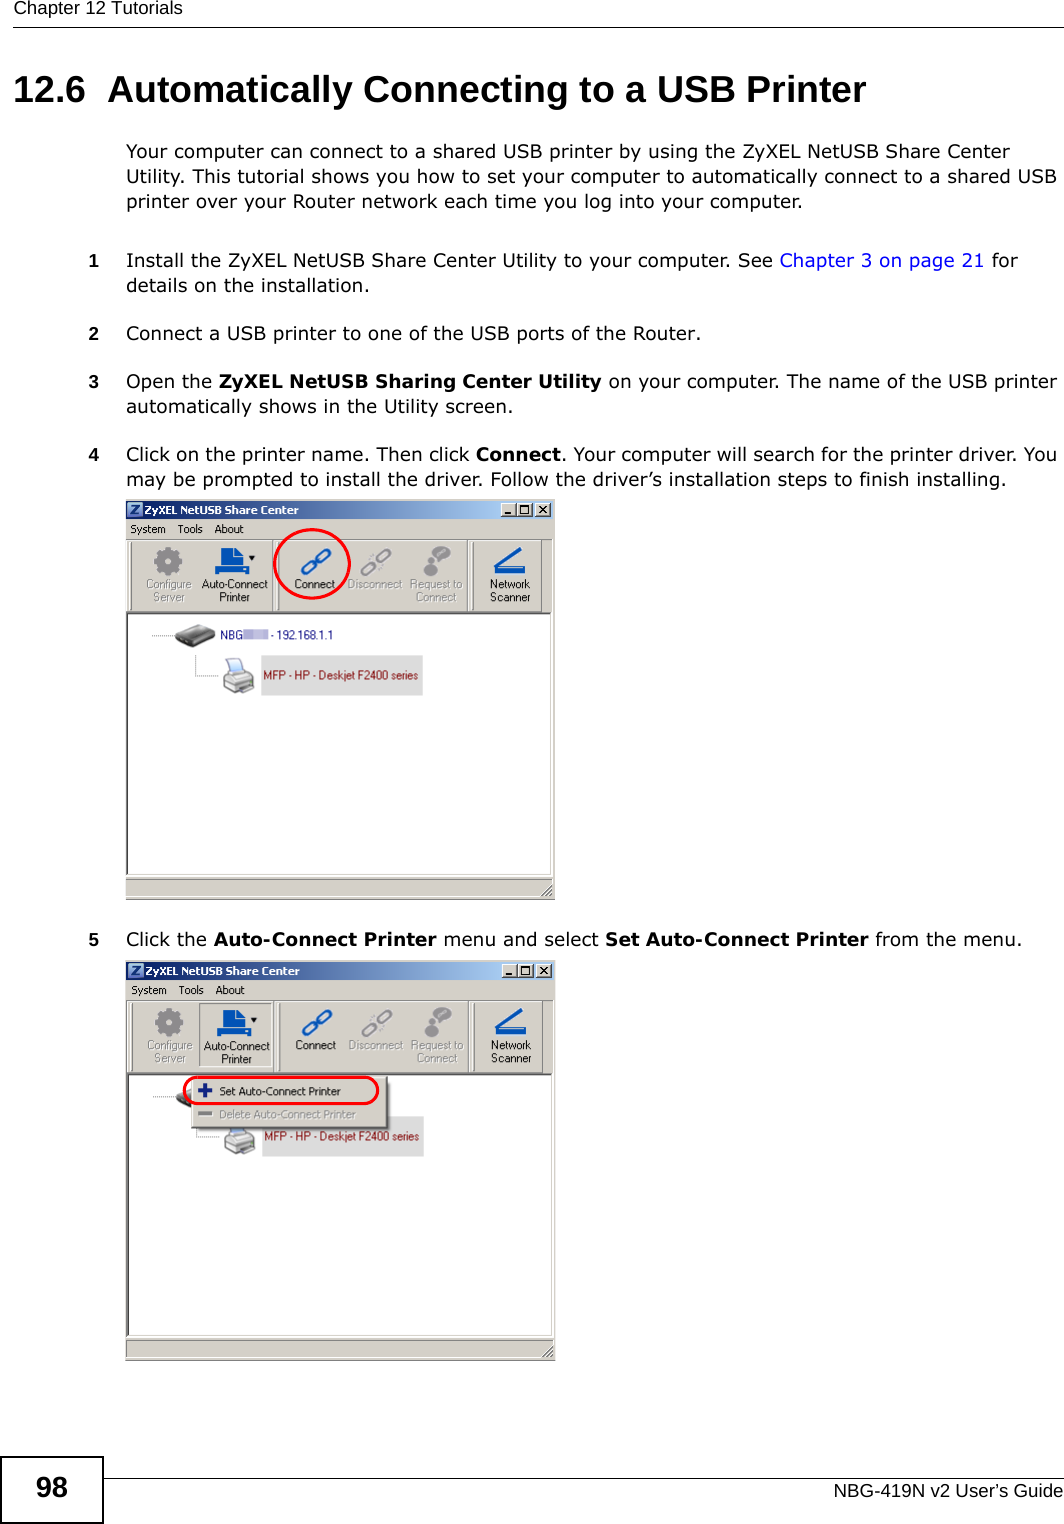 Chapter 12 TutorialsNBG-419N v2 User’s Guide9812.6  Automatically Connecting to a USB PrinterYour computer can connect to a shared USB printer by using the ZyXEL NetUSB Share Center Utility. This tutorial shows you how to set your computer to automatically connect to a shared USB printer over your Router network each time you log into your computer. 1Install the ZyXEL NetUSB Share Center Utility to your computer. See Chapter 3 on page 21 for details on the installation.2Connect a USB printer to one of the USB ports of the Router. 3Open the ZyXEL NetUSB Sharing Center Utility on your computer. The name of the USB printer automatically shows in the Utility screen. 4Click on the printer name. Then click Connect. Your computer will search for the printer driver. You may be prompted to install the driver. Follow the driver’s installation steps to finish installing.   5Click the Auto-Connect Printer menu and select Set Auto-Connect Printer from the menu.